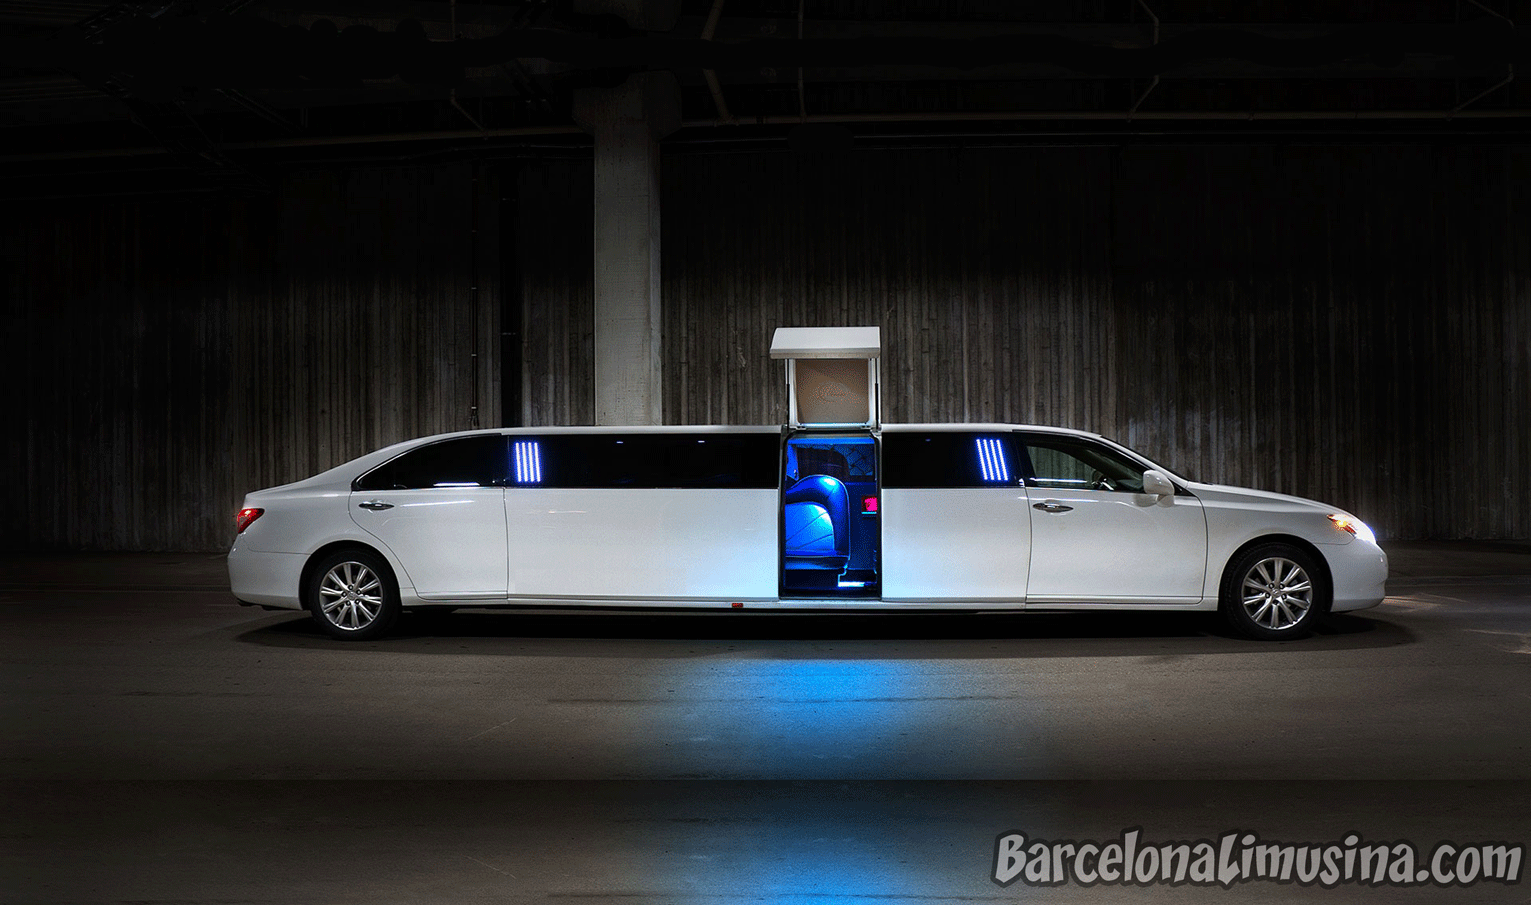 w Barcelona Sitges Traditional Stretch Limousine